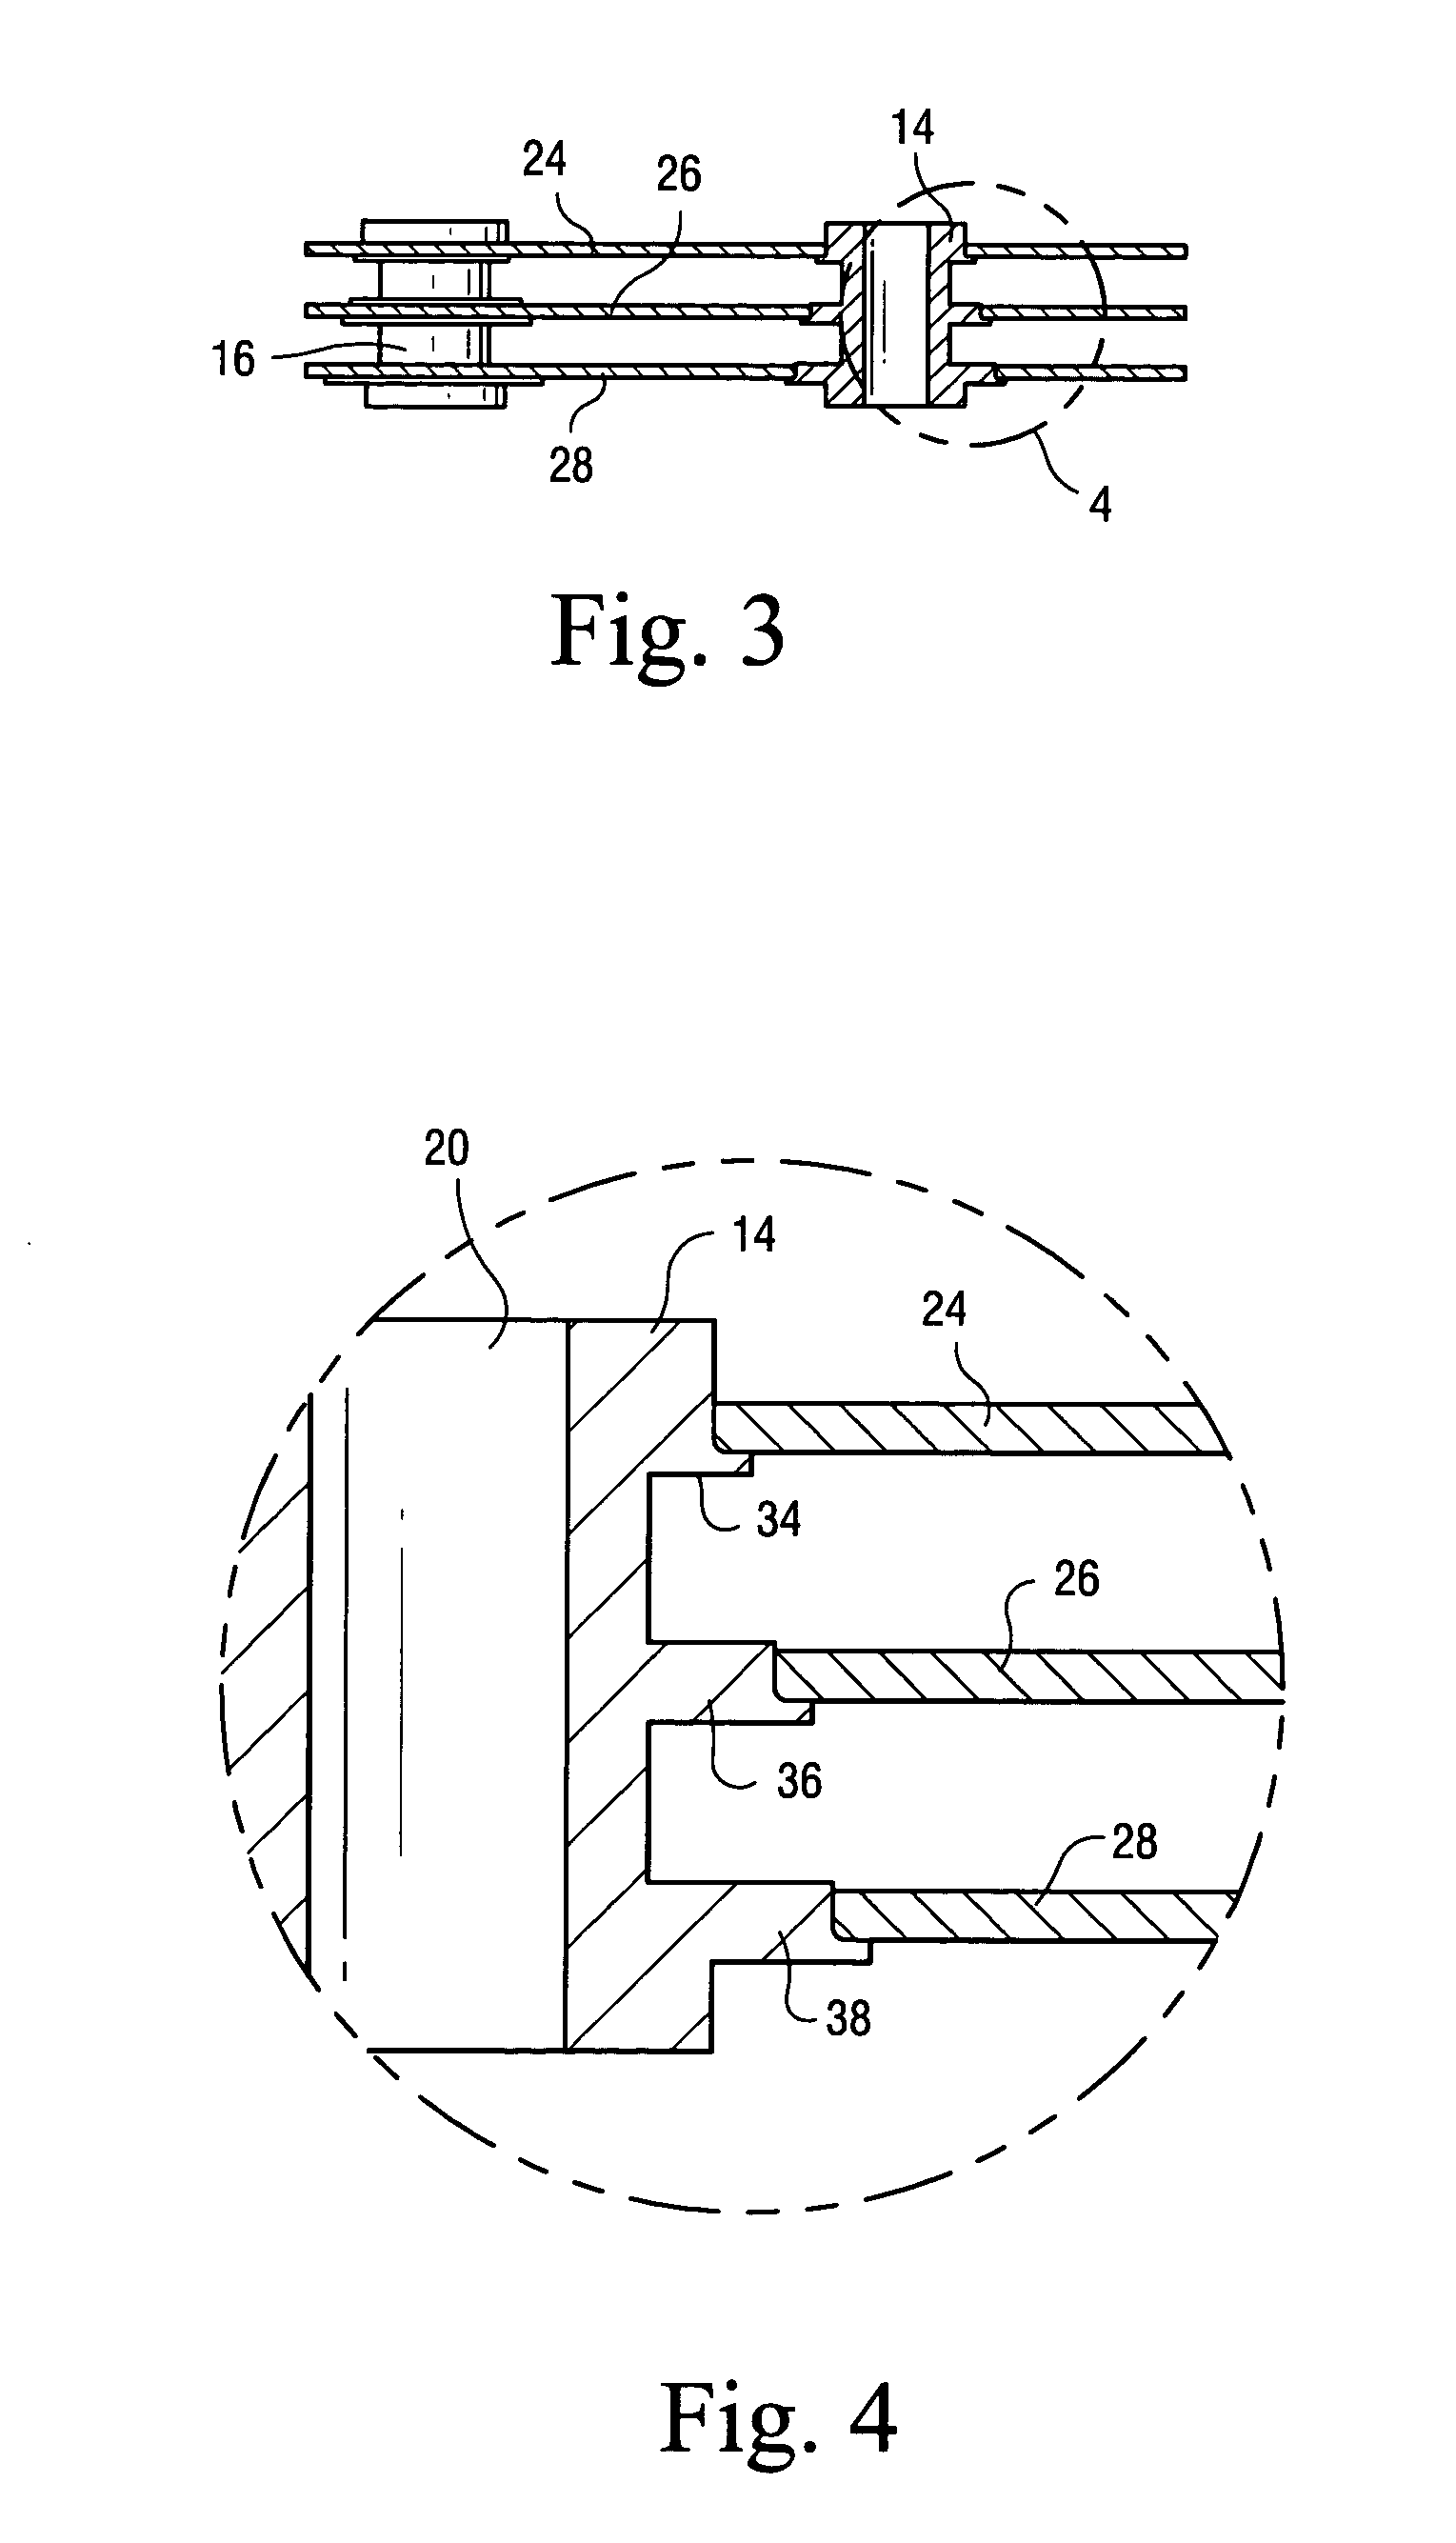 Thermal isolation device for liquid fuel components